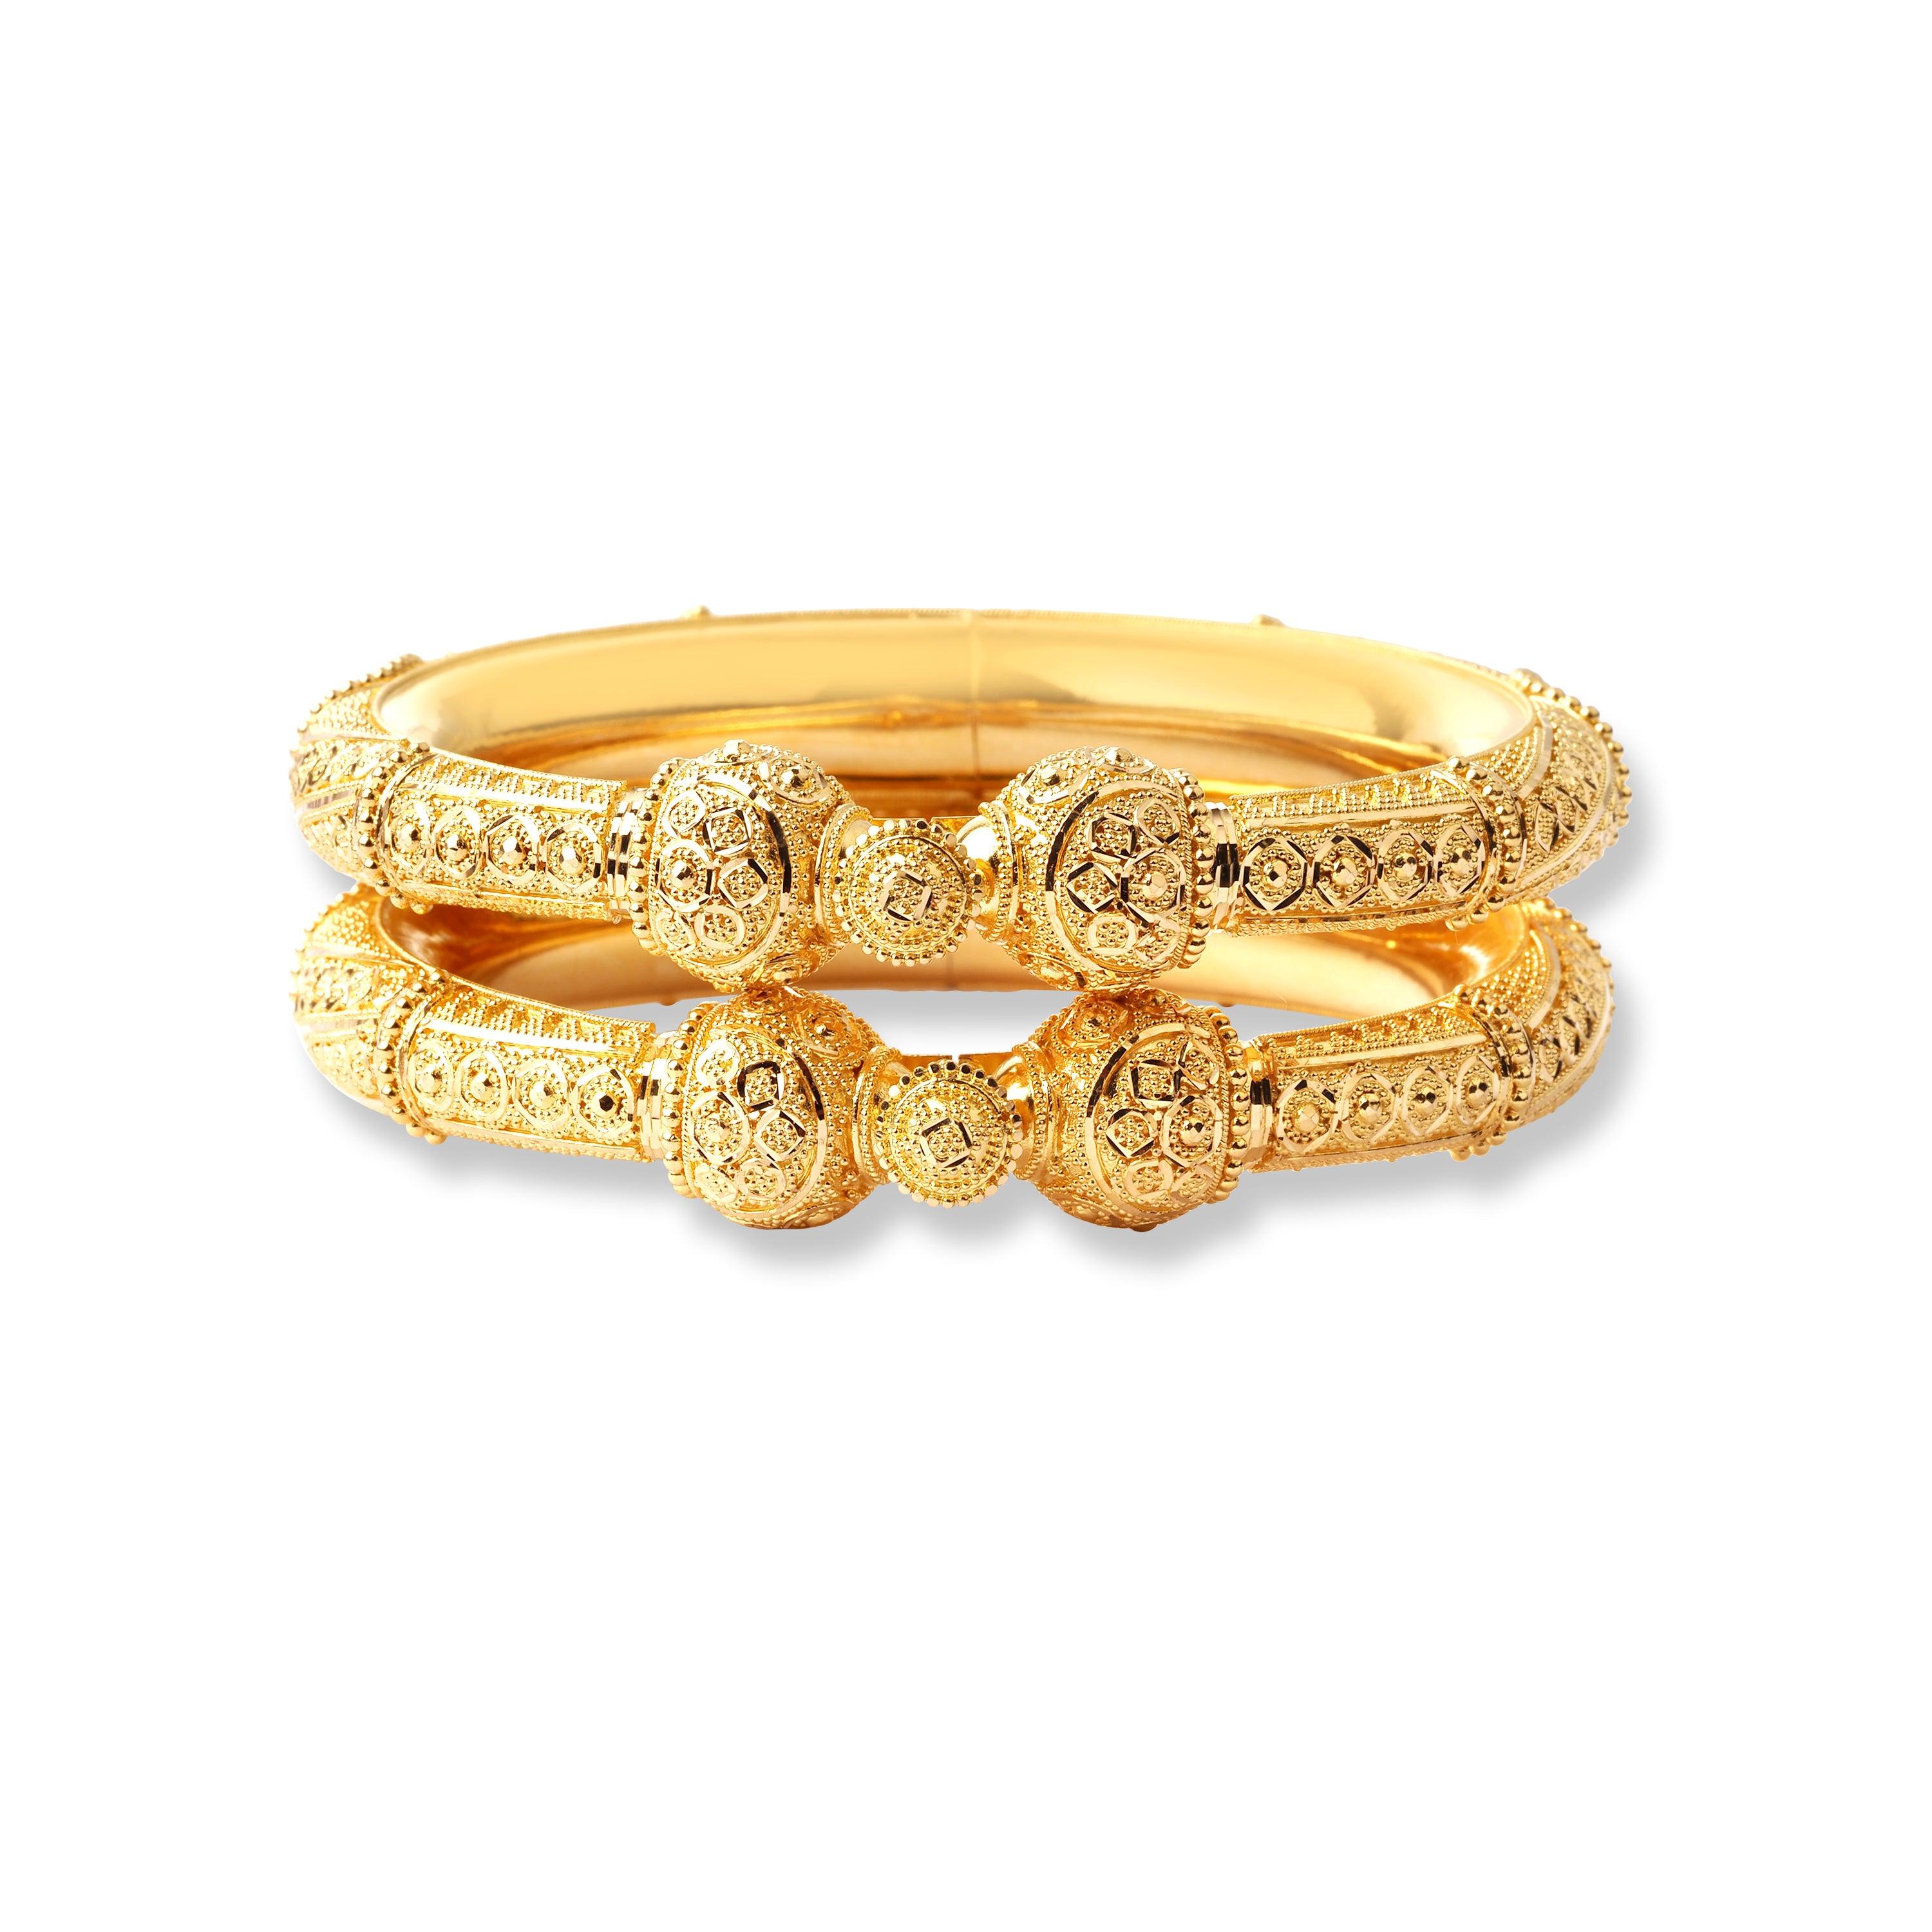 Pair of 22ct Hollow Tube Bangles With Hinge & Openable Screw Fitting B-8511 - Minar Jewellers